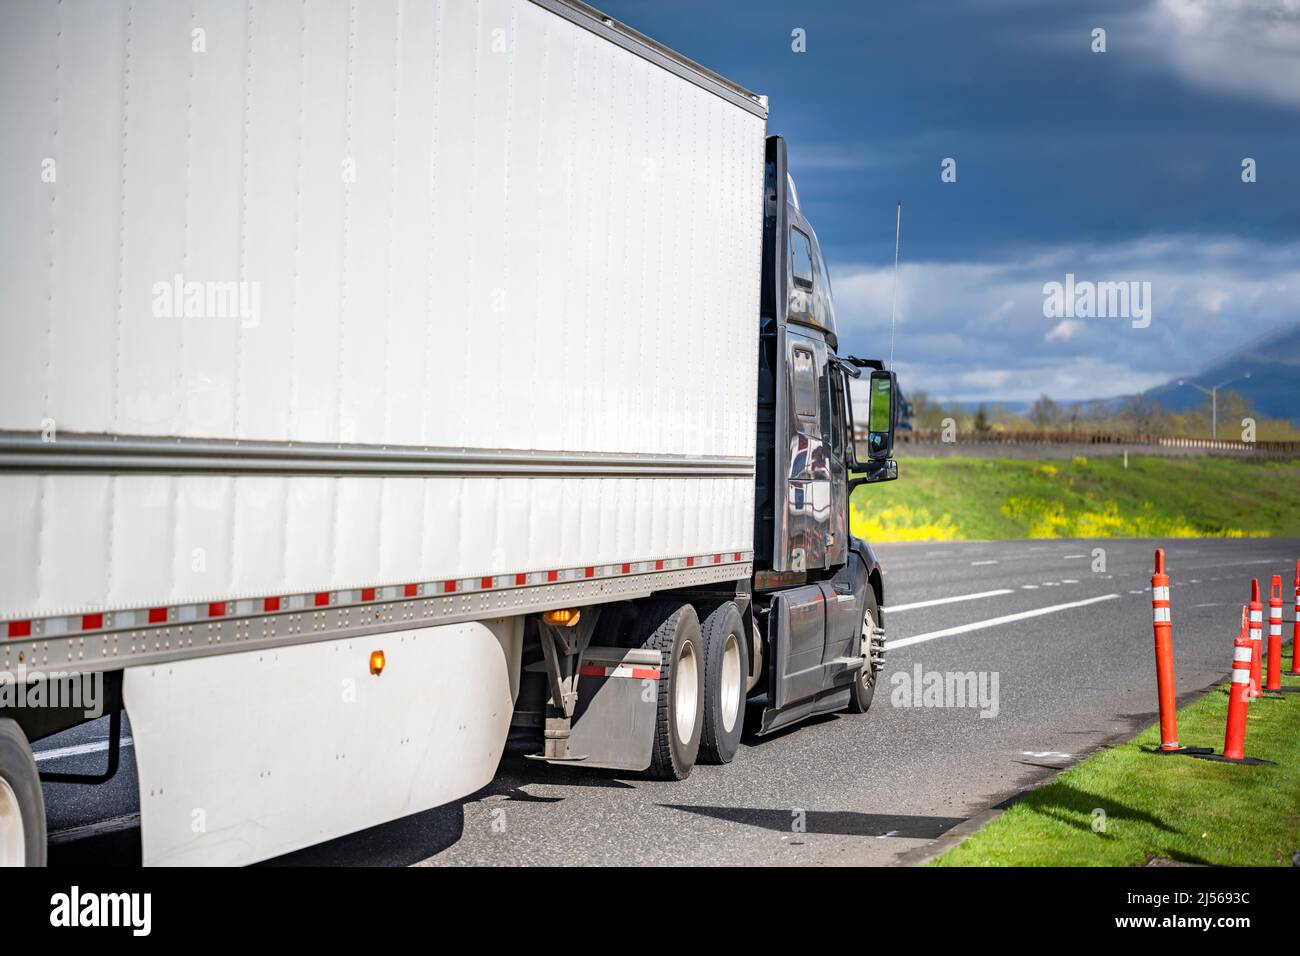 Industrial professional black big rig bonnet semi truck transporting commercial cargo in dry van semi trailer with aerodynamic skirt running on the lo Stock Photo